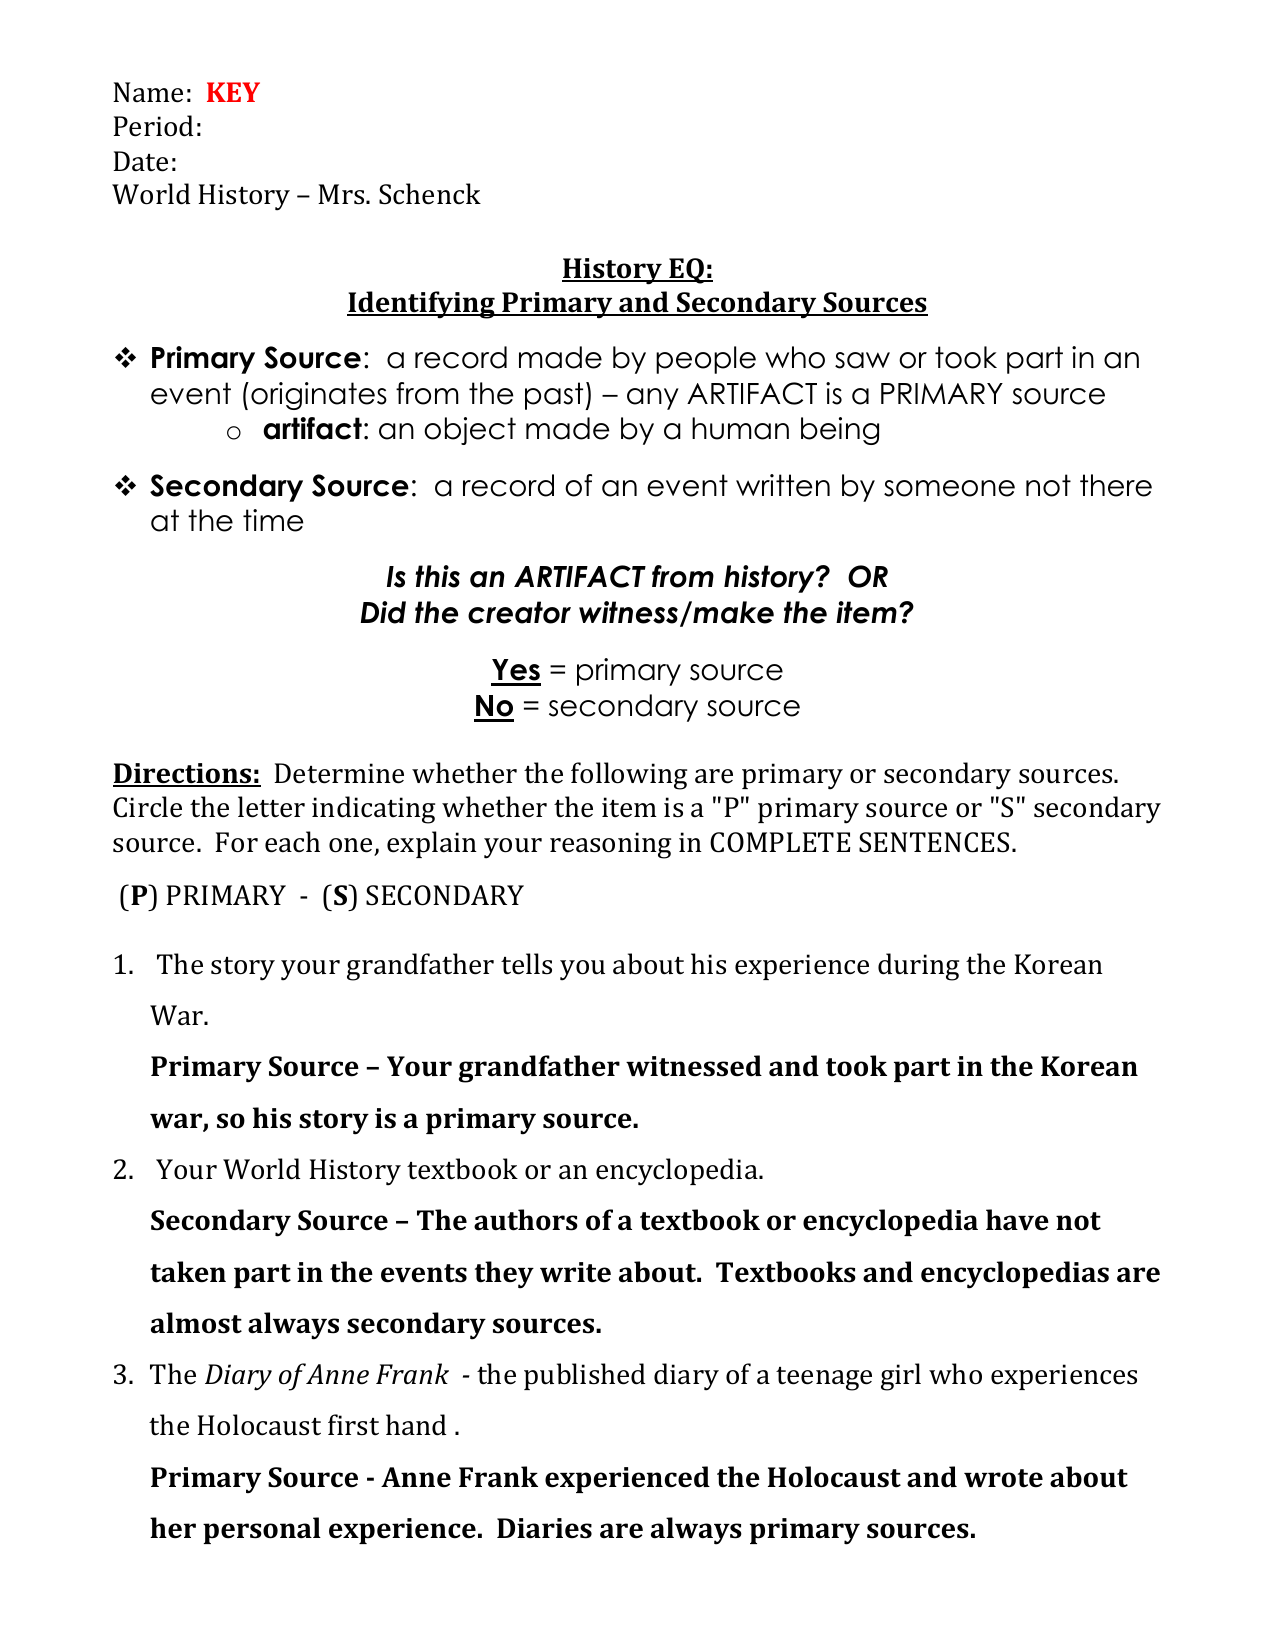 Worksheet for Identifying Primary and Secondary Sources Inside Primary And Secondary Sources Worksheet